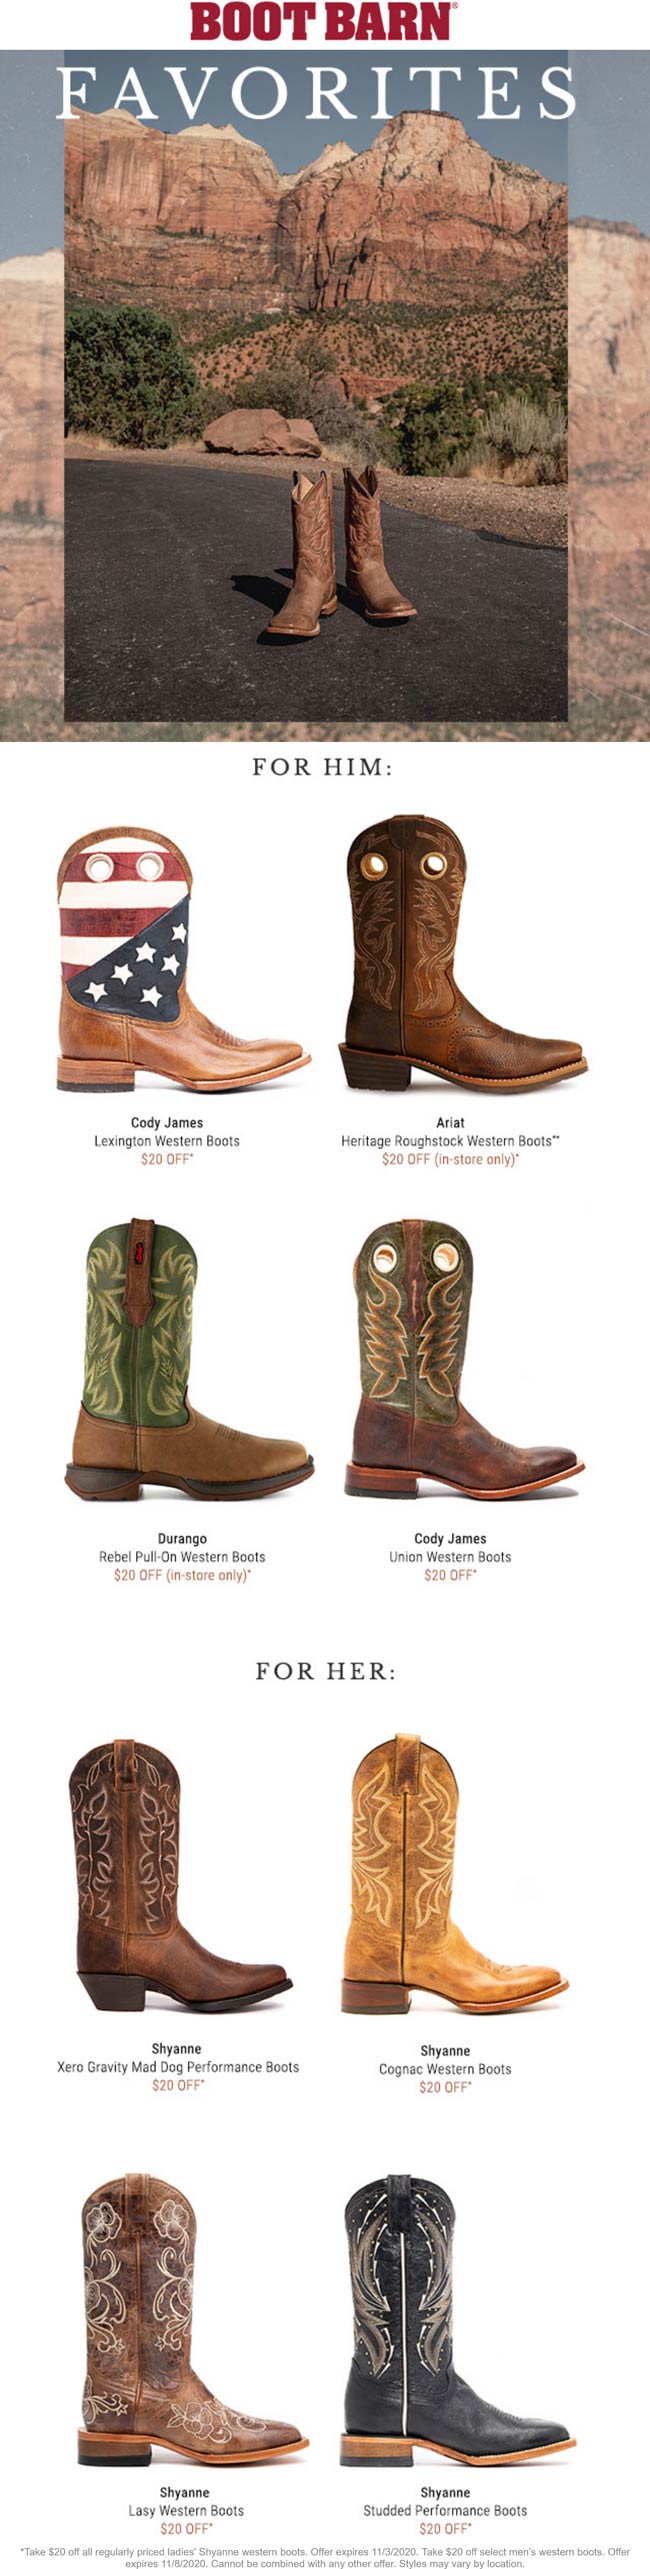 20 off favorite boots at Boot Barn bootbarn The Coupons App®